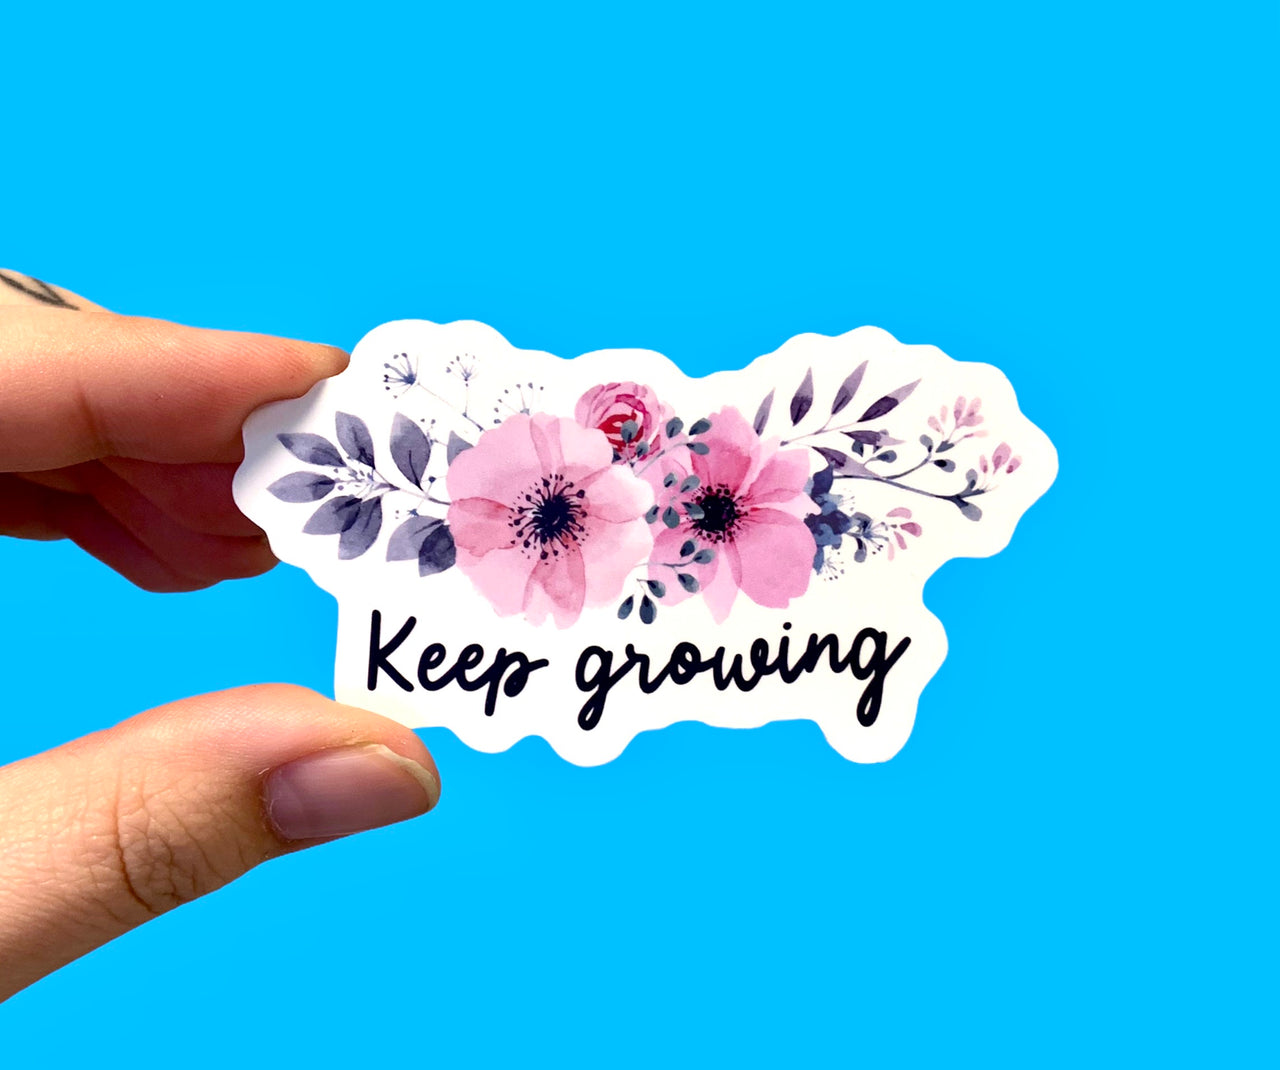 Keep growing (pack of 3 or 5 stickers)